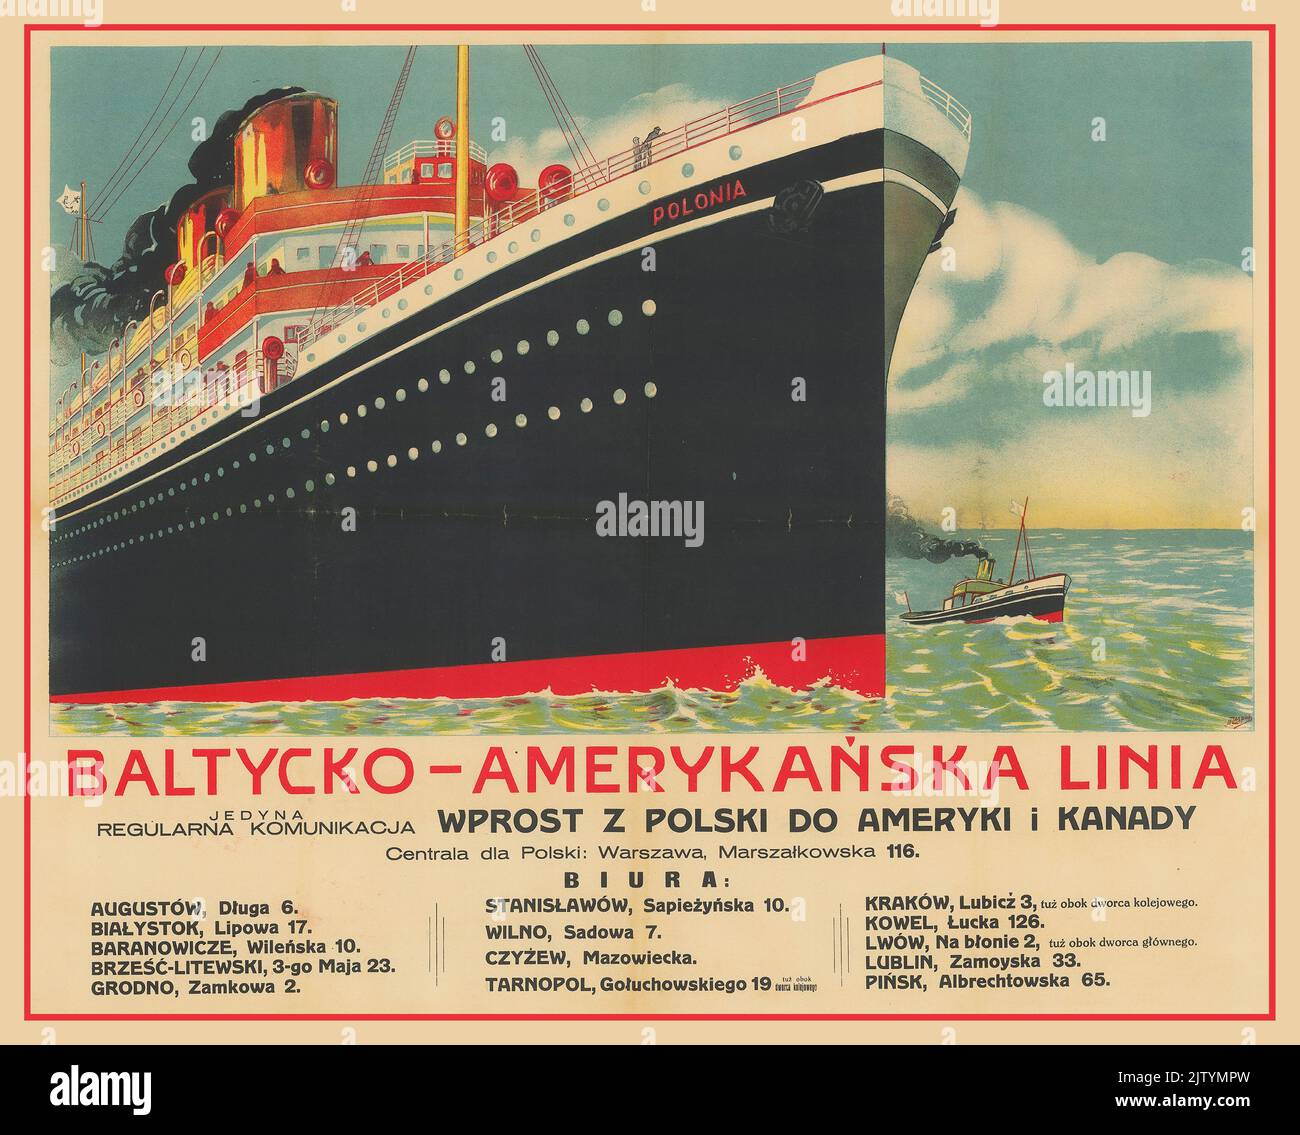 SS Polonia Polish Cruise Liner America Line 1930s Poster Advertising. The Baltic-America line, the only regular Ocean Liner transport directly from Poland to America and Canada. artist Zaspicki Poland Stock Photo